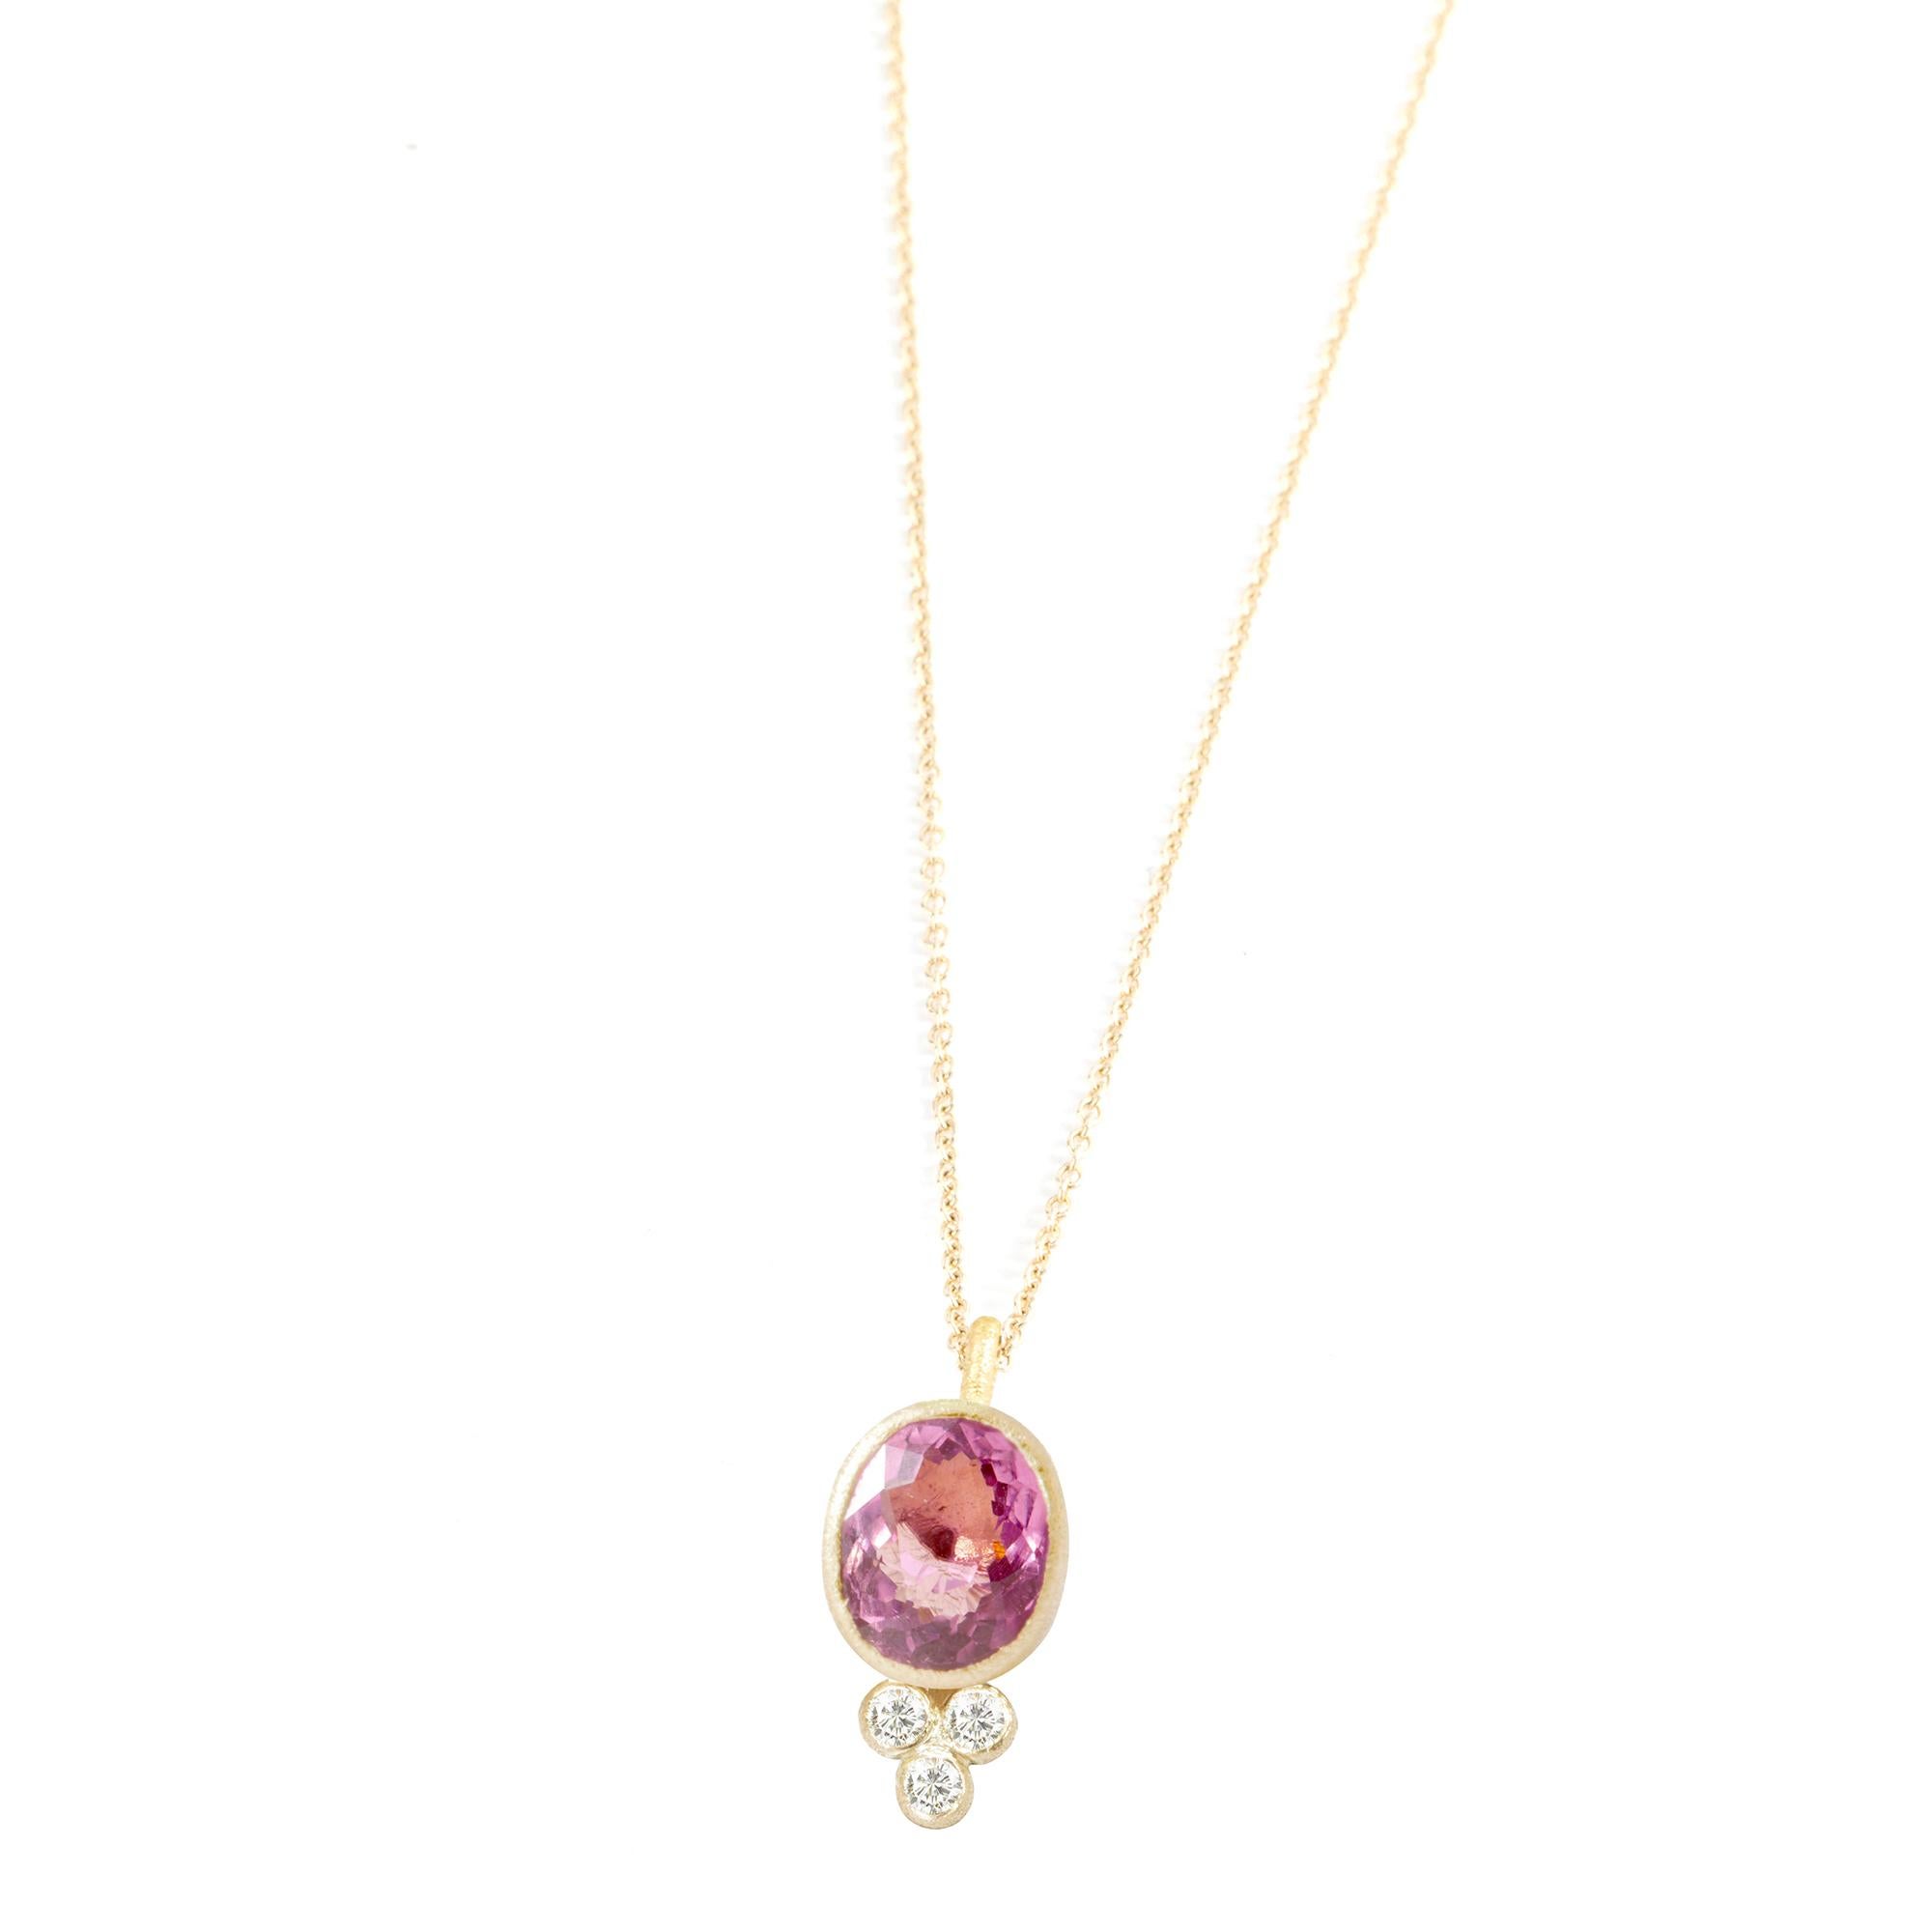 Contemporary Lilly Pink Tourmaline 18 Karat Gold Necklace For Sale